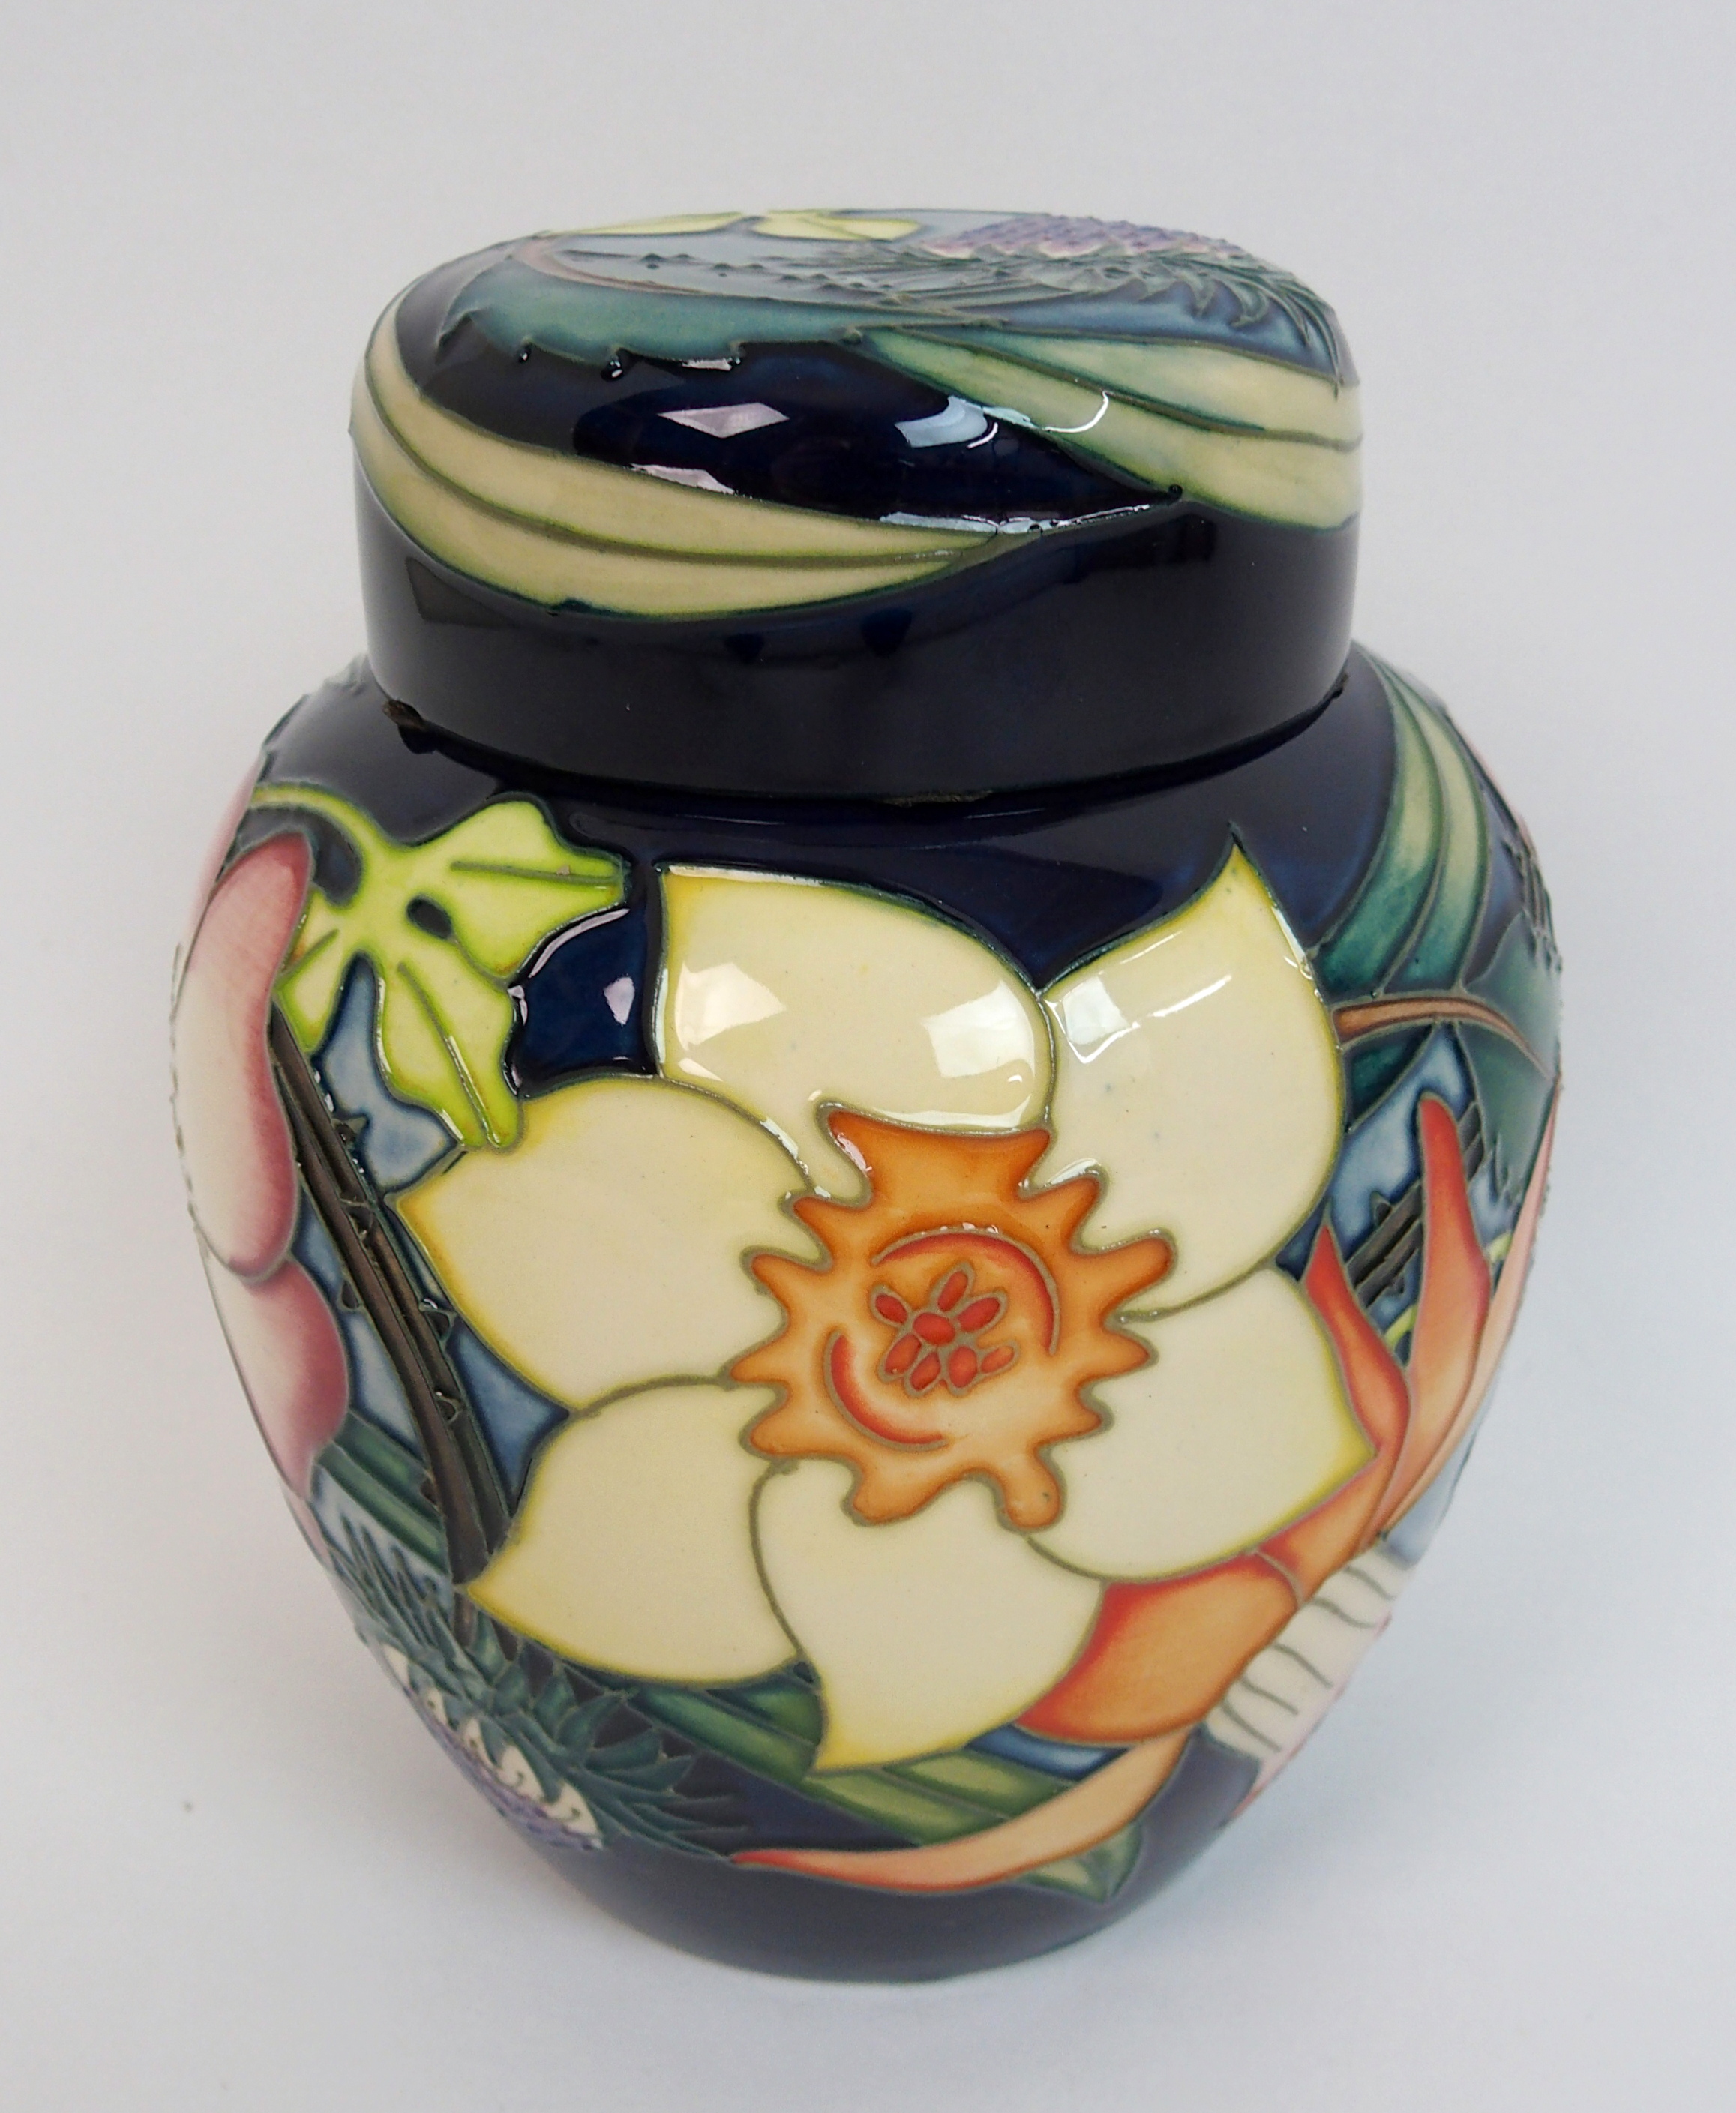 A Moorcroft Golden Jubilee pattern ginger jar designed by Emma Bossons, circa 2001, the body with